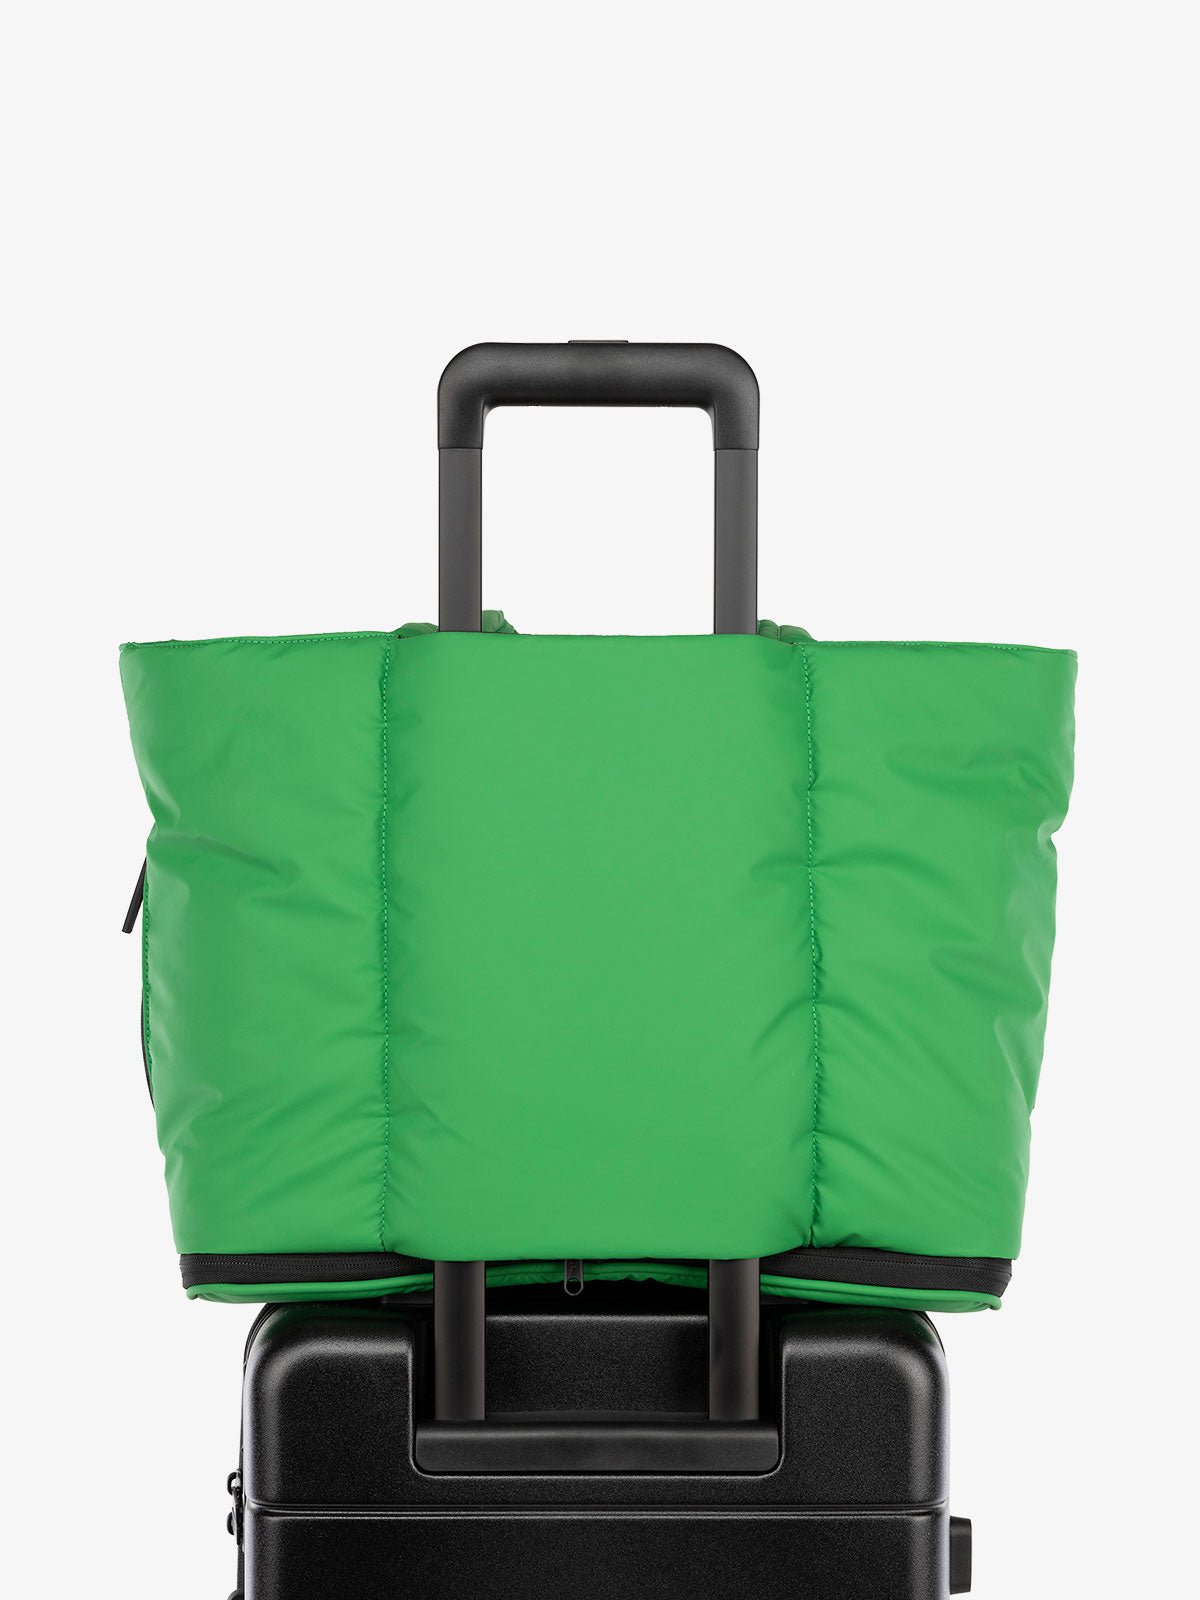 CALPAK Luka expandable travel bag with laptop compartment and trolley sleeve in winter green